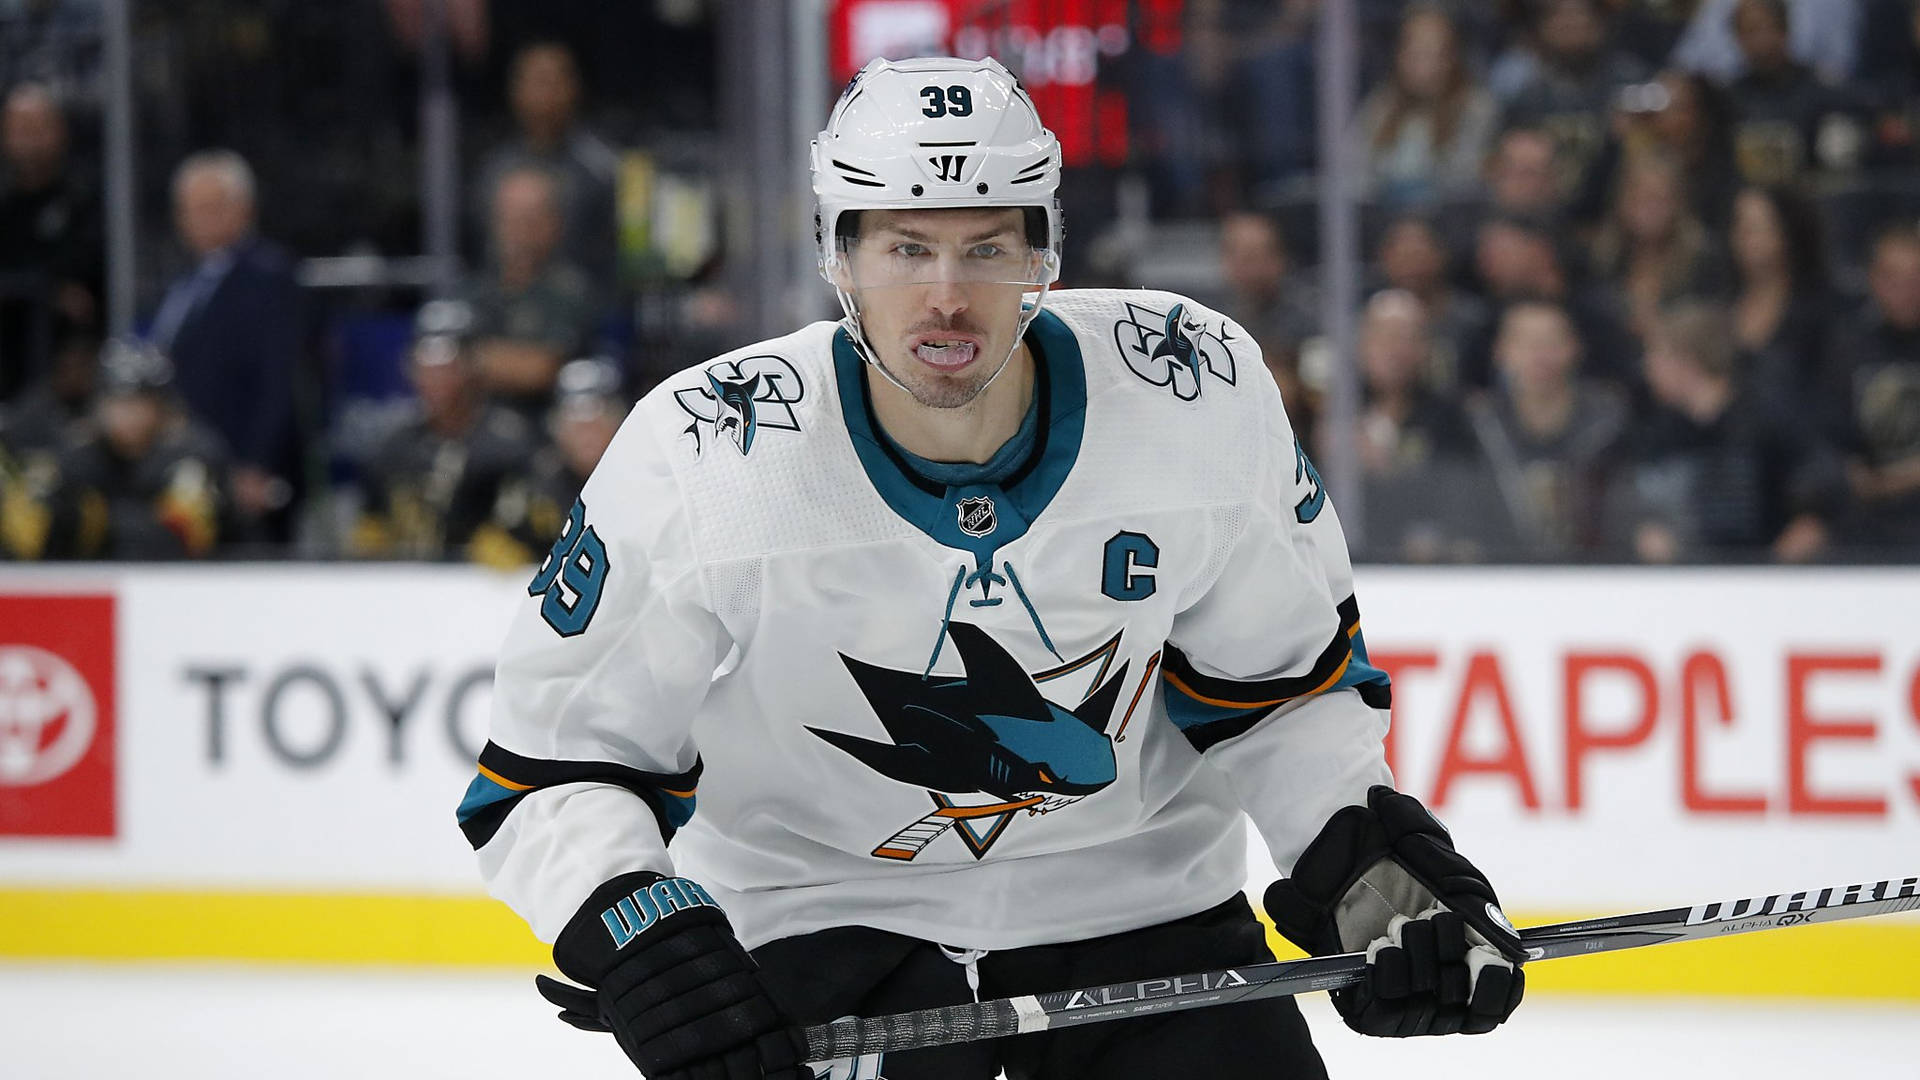 Canadian Professional Ice Hockey Player Logan Couture